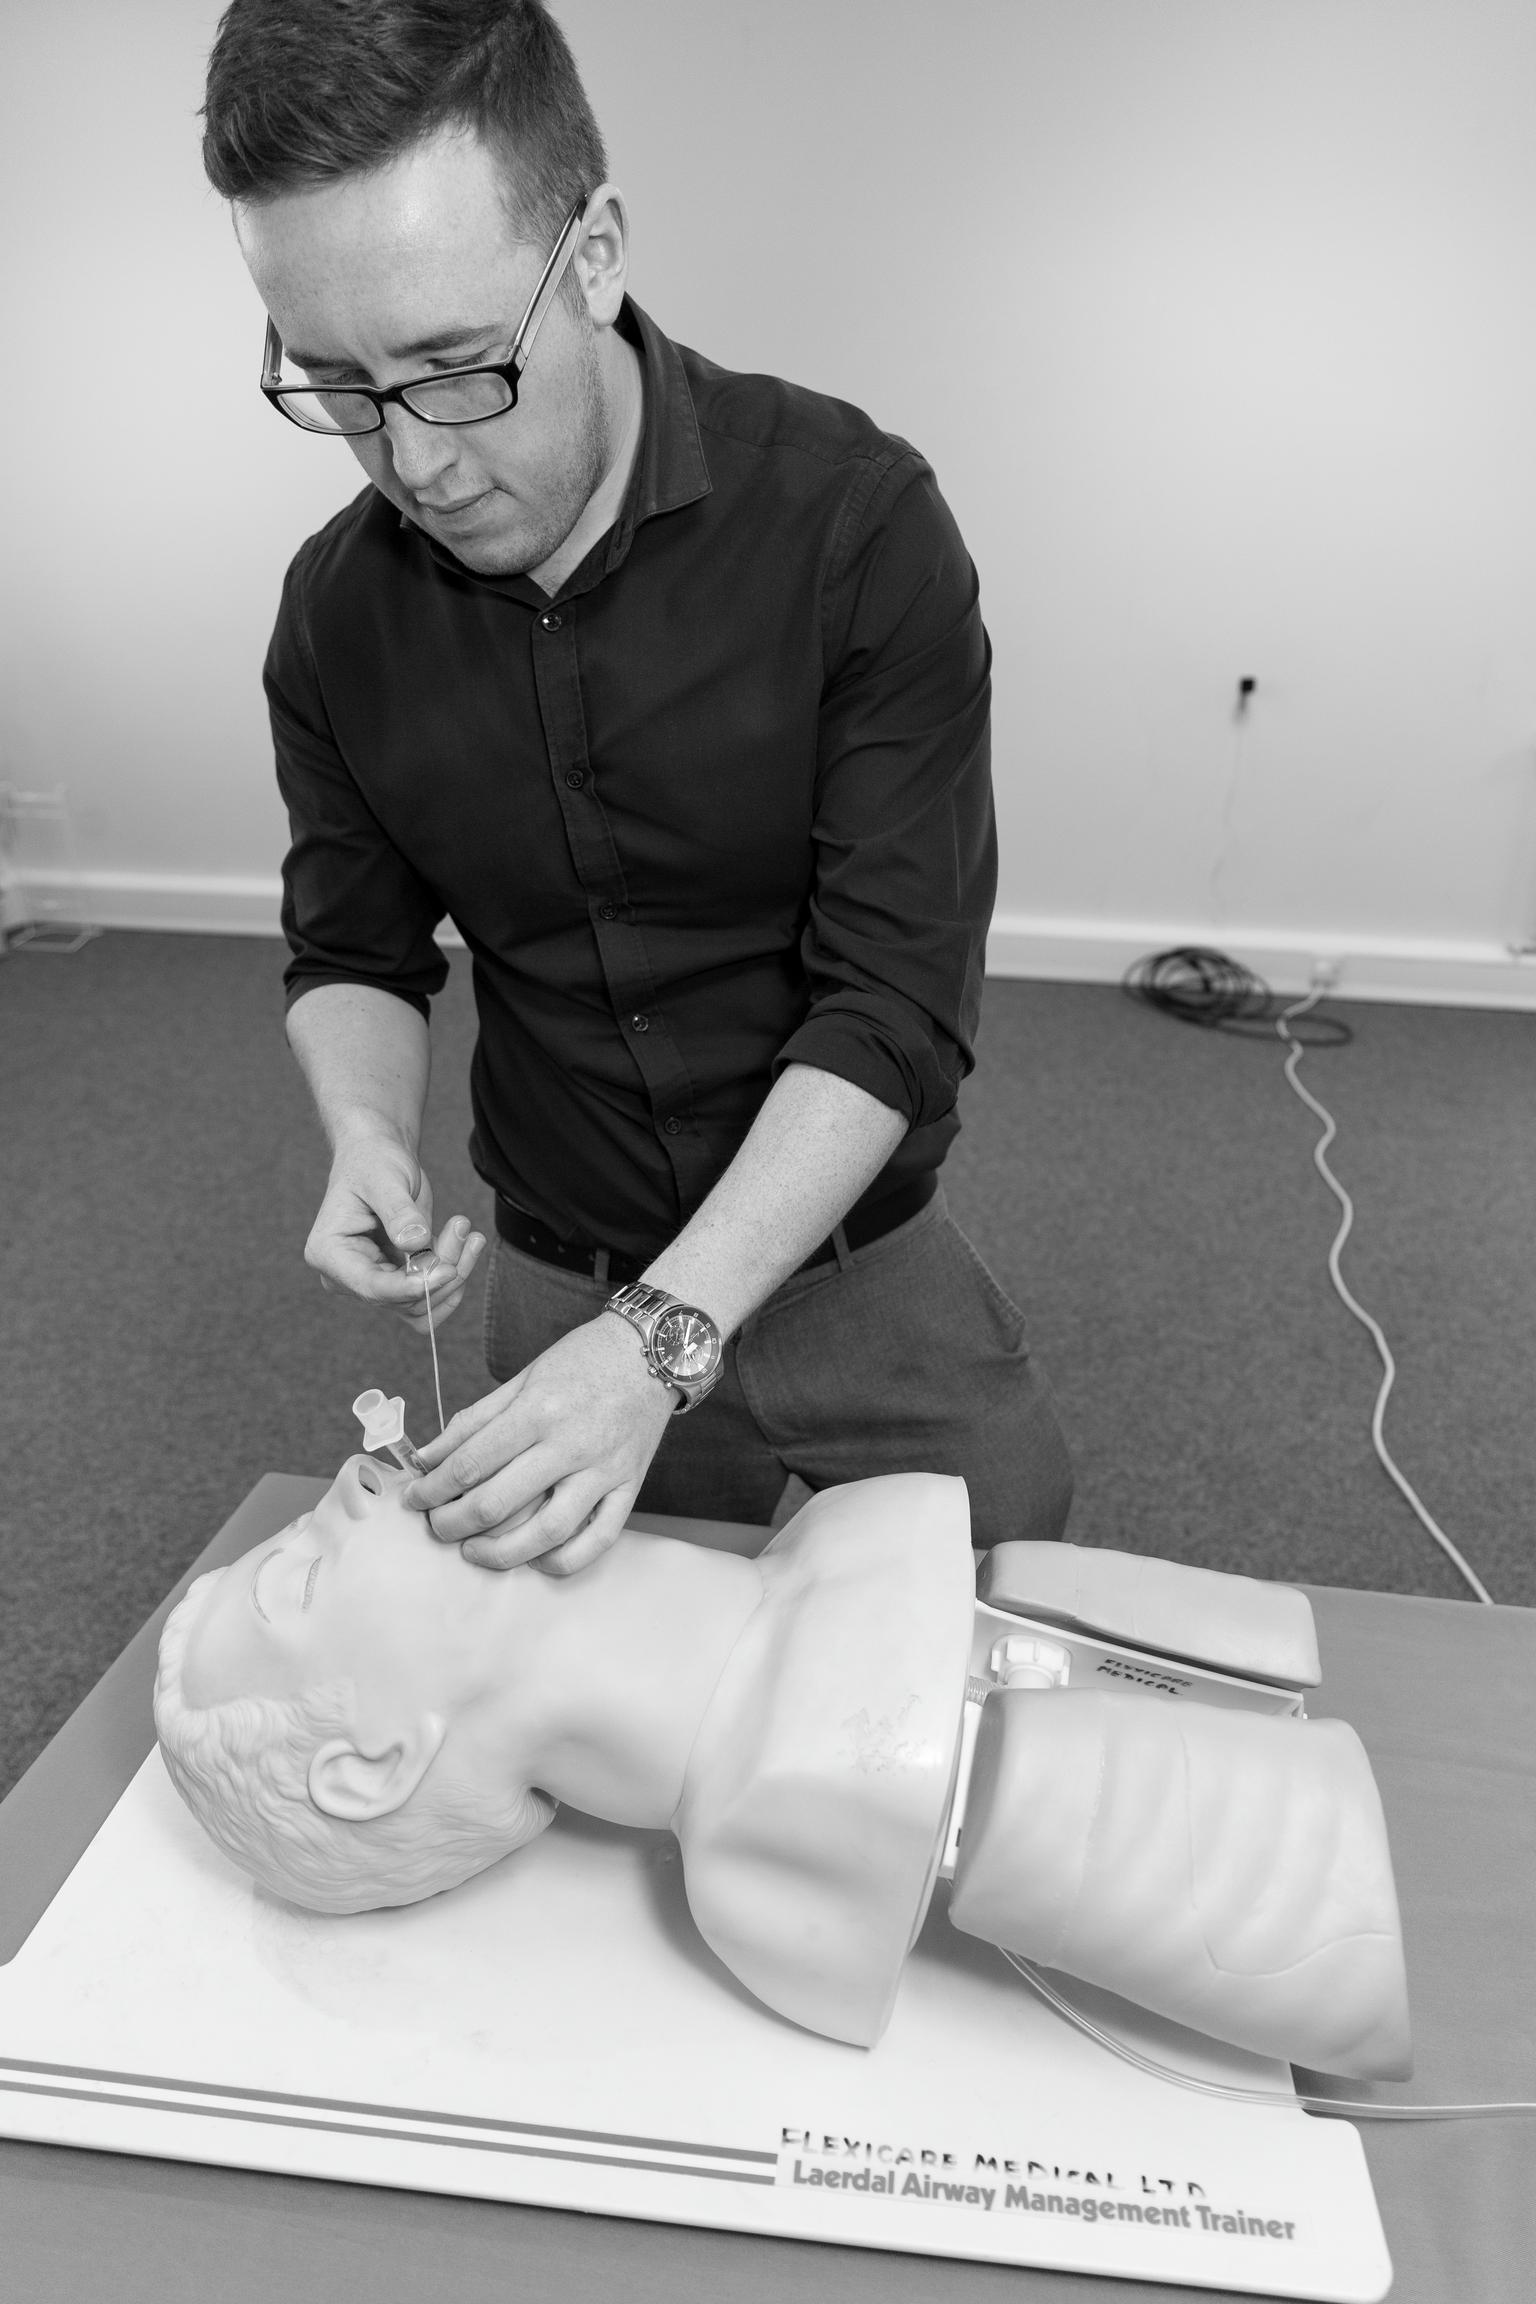 Flexicare medical products. Jordan Thorne demonstrating an Endotracheal tube on dummy. Mountain Ash, Wales